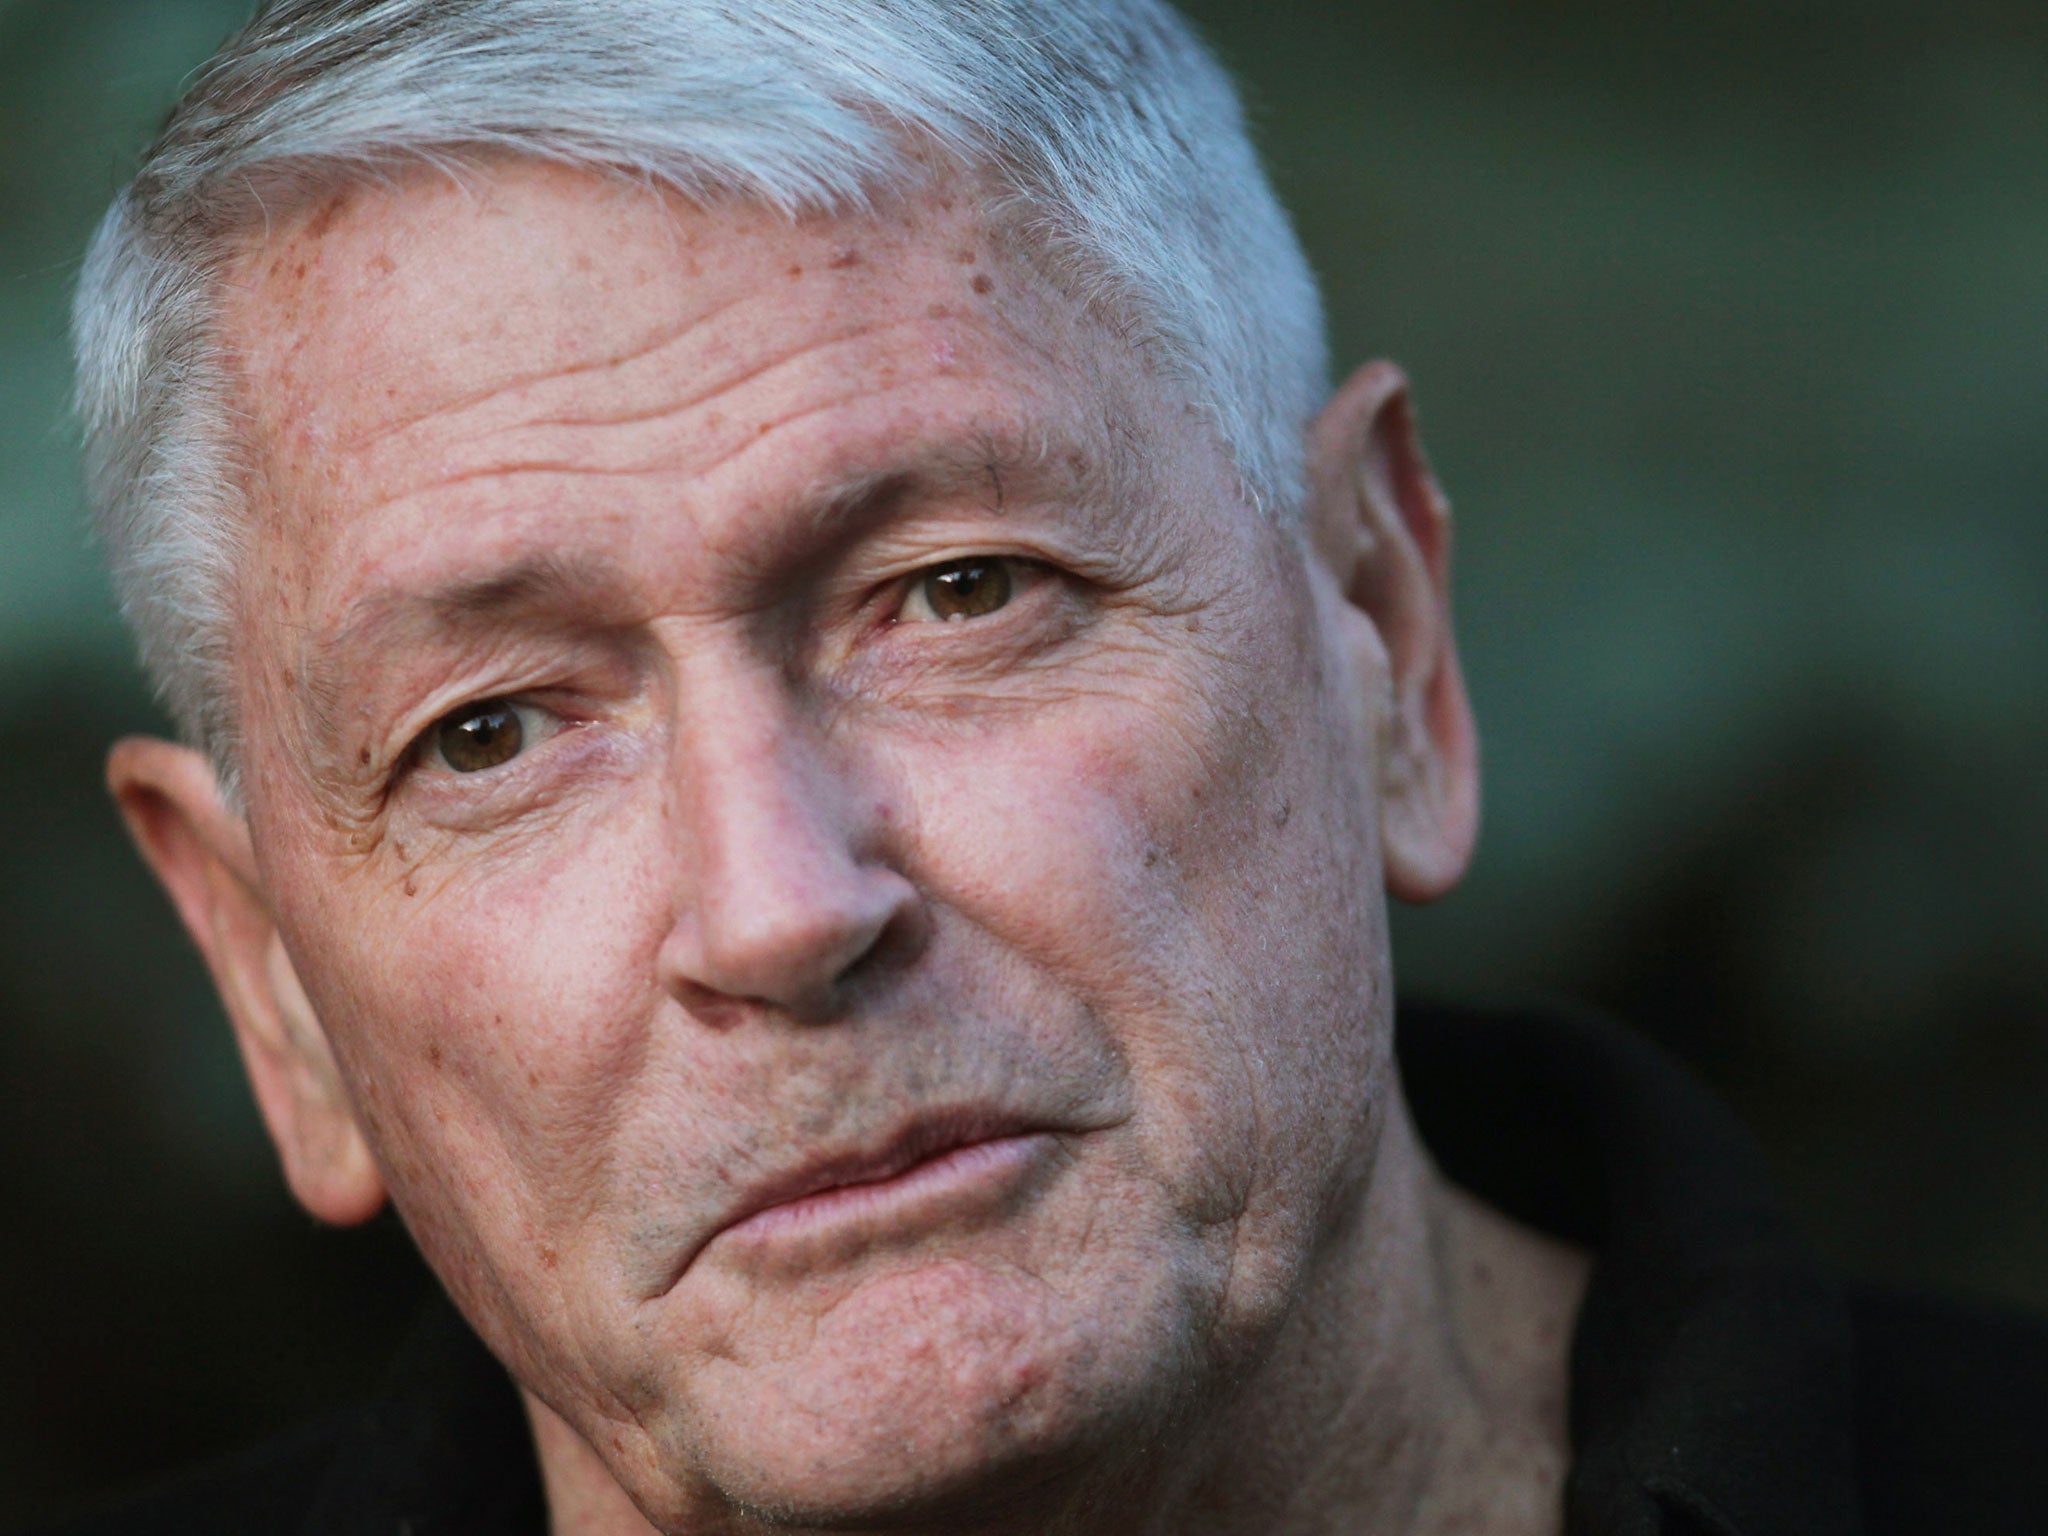 John Malone is a legendary deal maker in the American media and telecoms markets